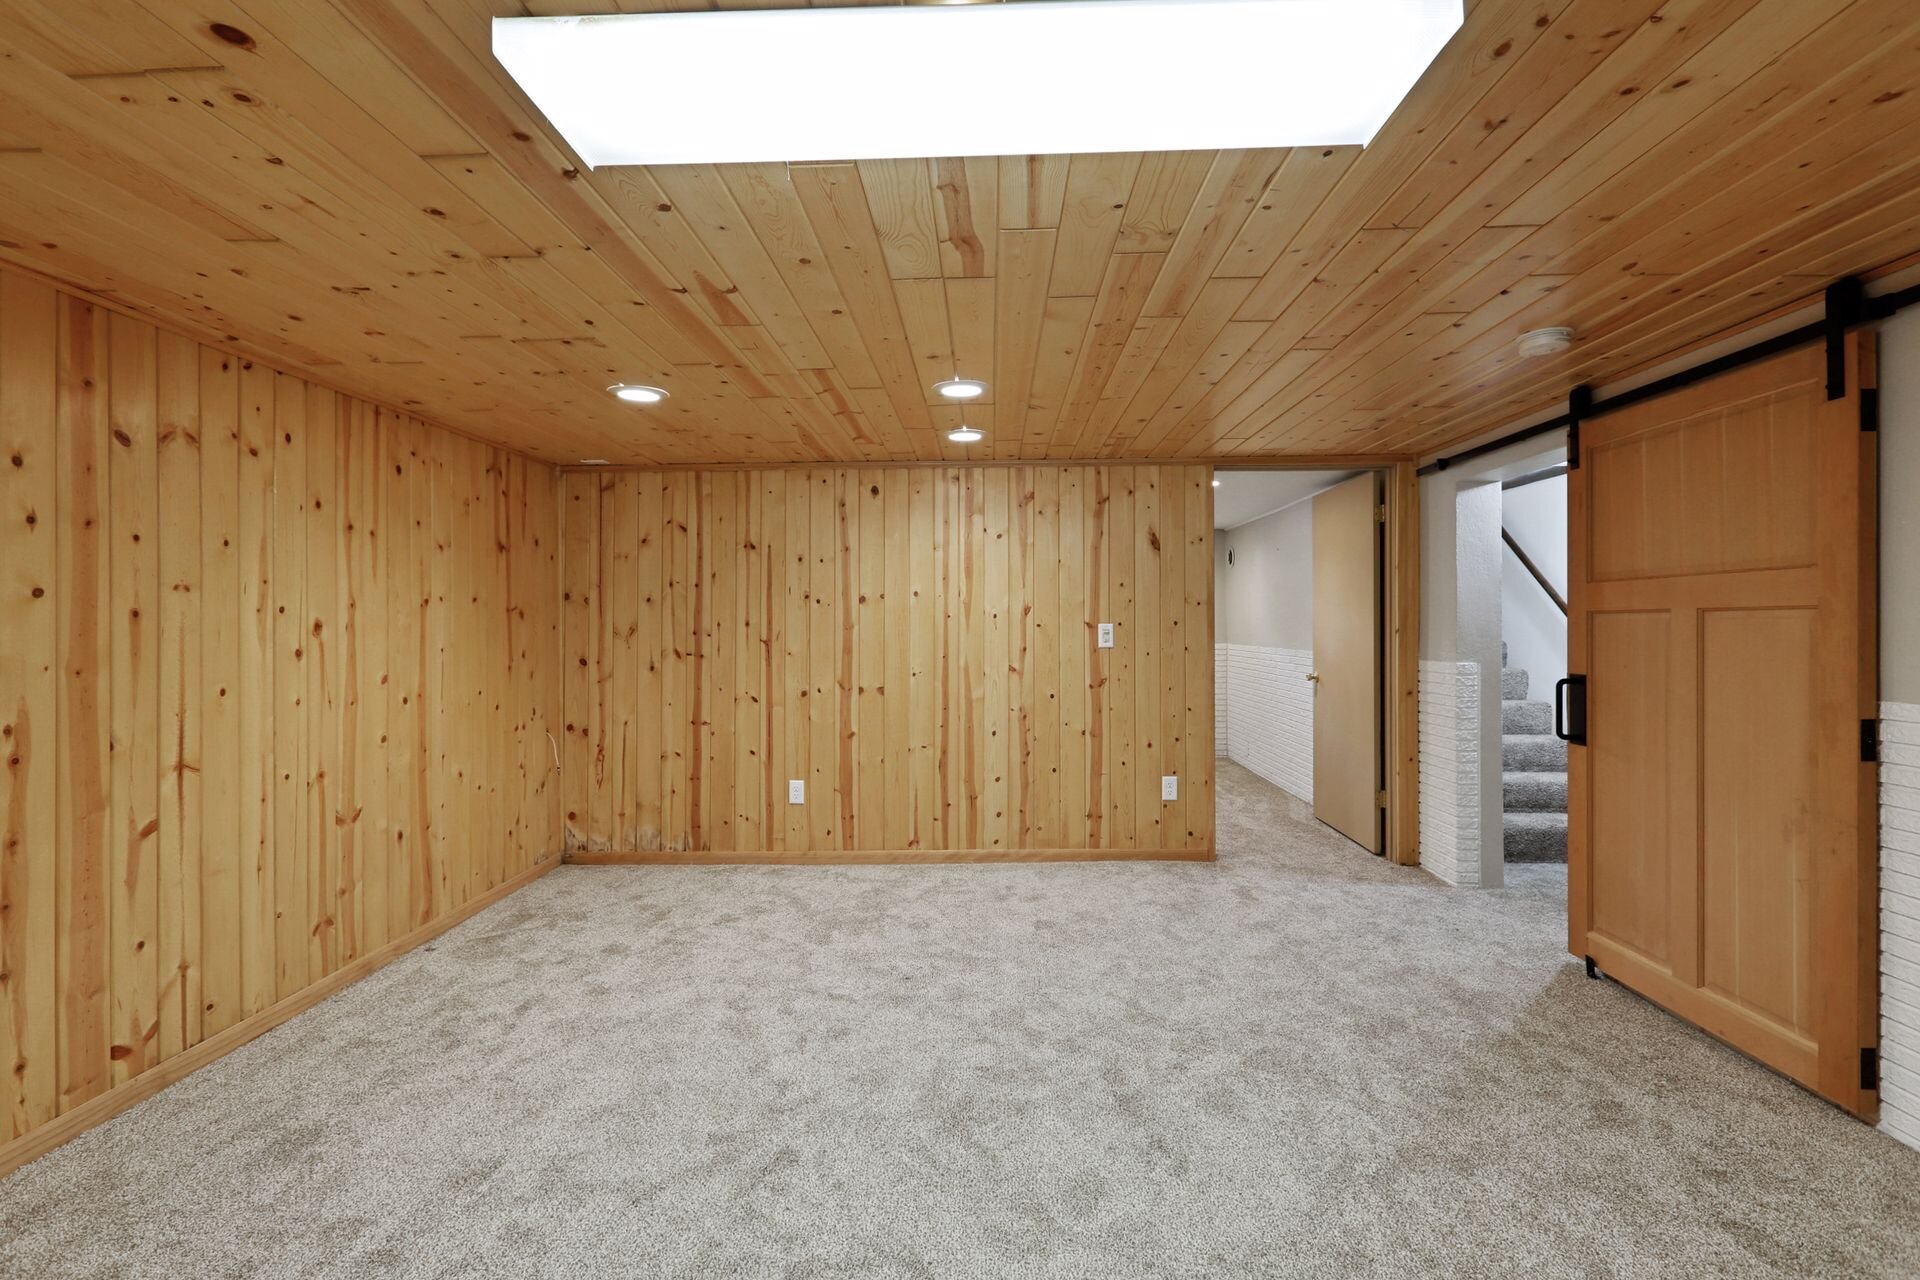 15. Gorgeous natural wood paneling throughout lower level.jpg